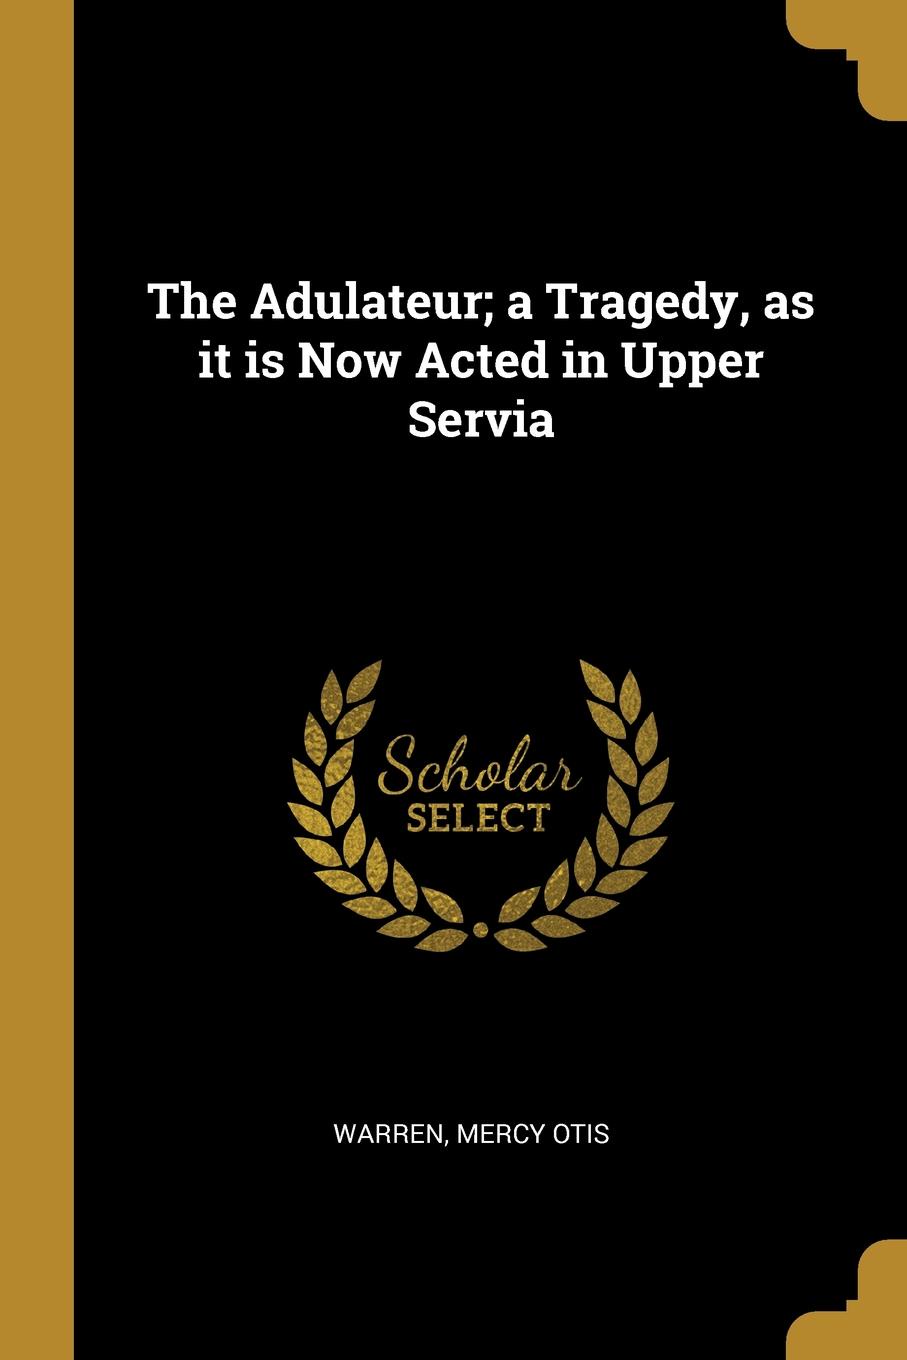 The Adulateur; a Tragedy, as it is Now Acted in Upper Servia